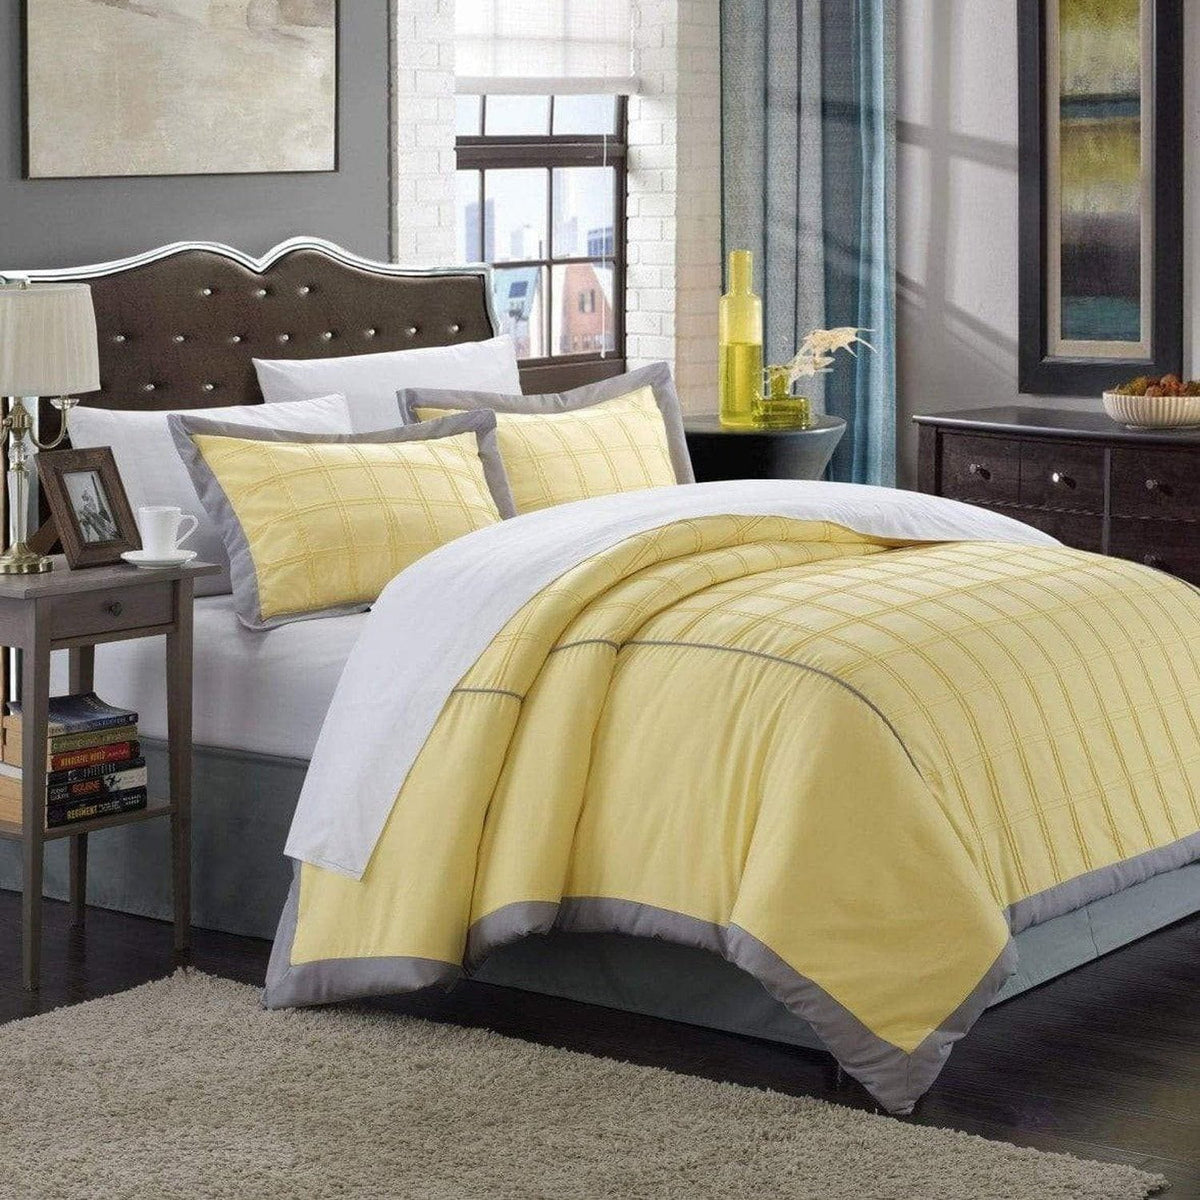 Chic Home Angelina 7 Piece Patchwork Duvet Cover Set 